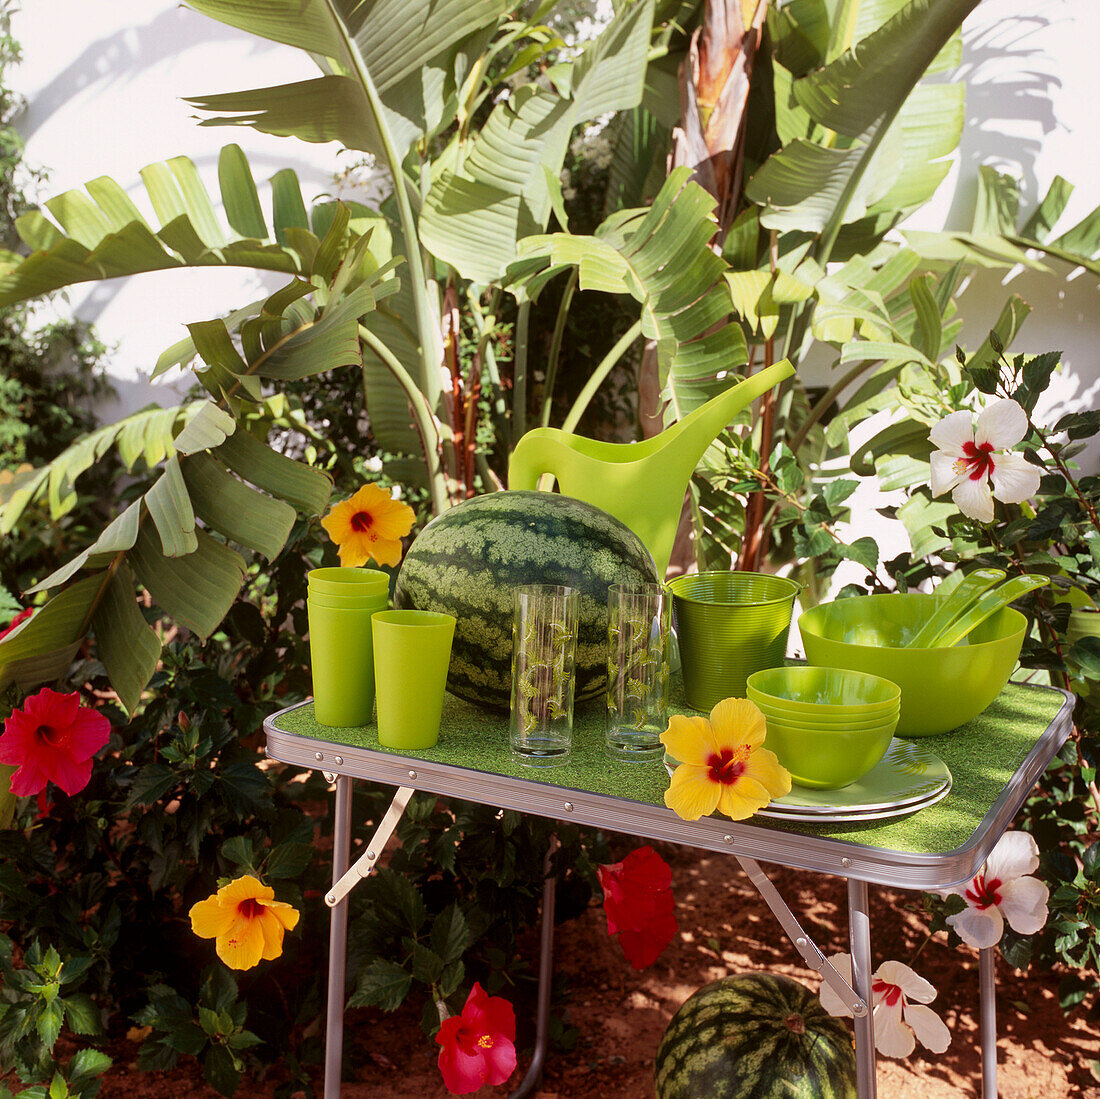 Green coloured plastic tableware on a foldaway table in a garden